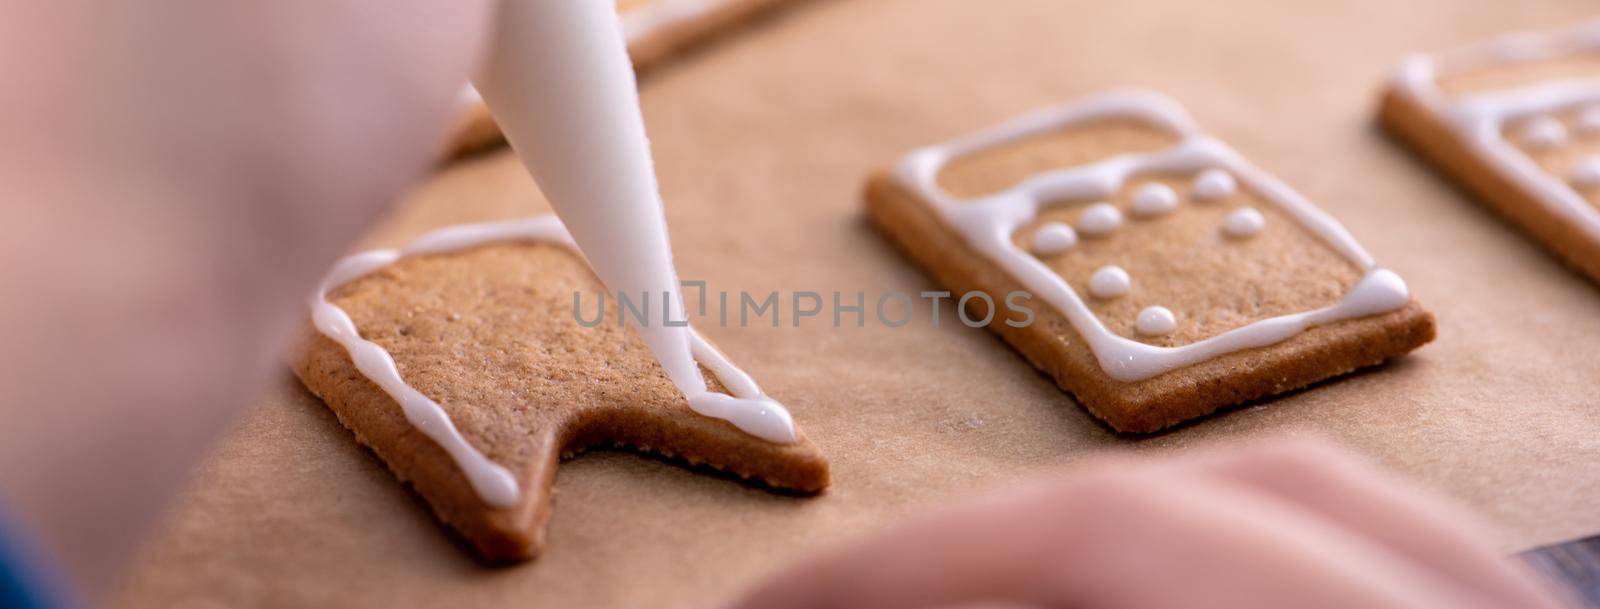 Young woman is decorating Christmas Gingerbread House cookies biscuit at home with frosting topping in icing bag, close up, lifestyle. by ROMIXIMAGE